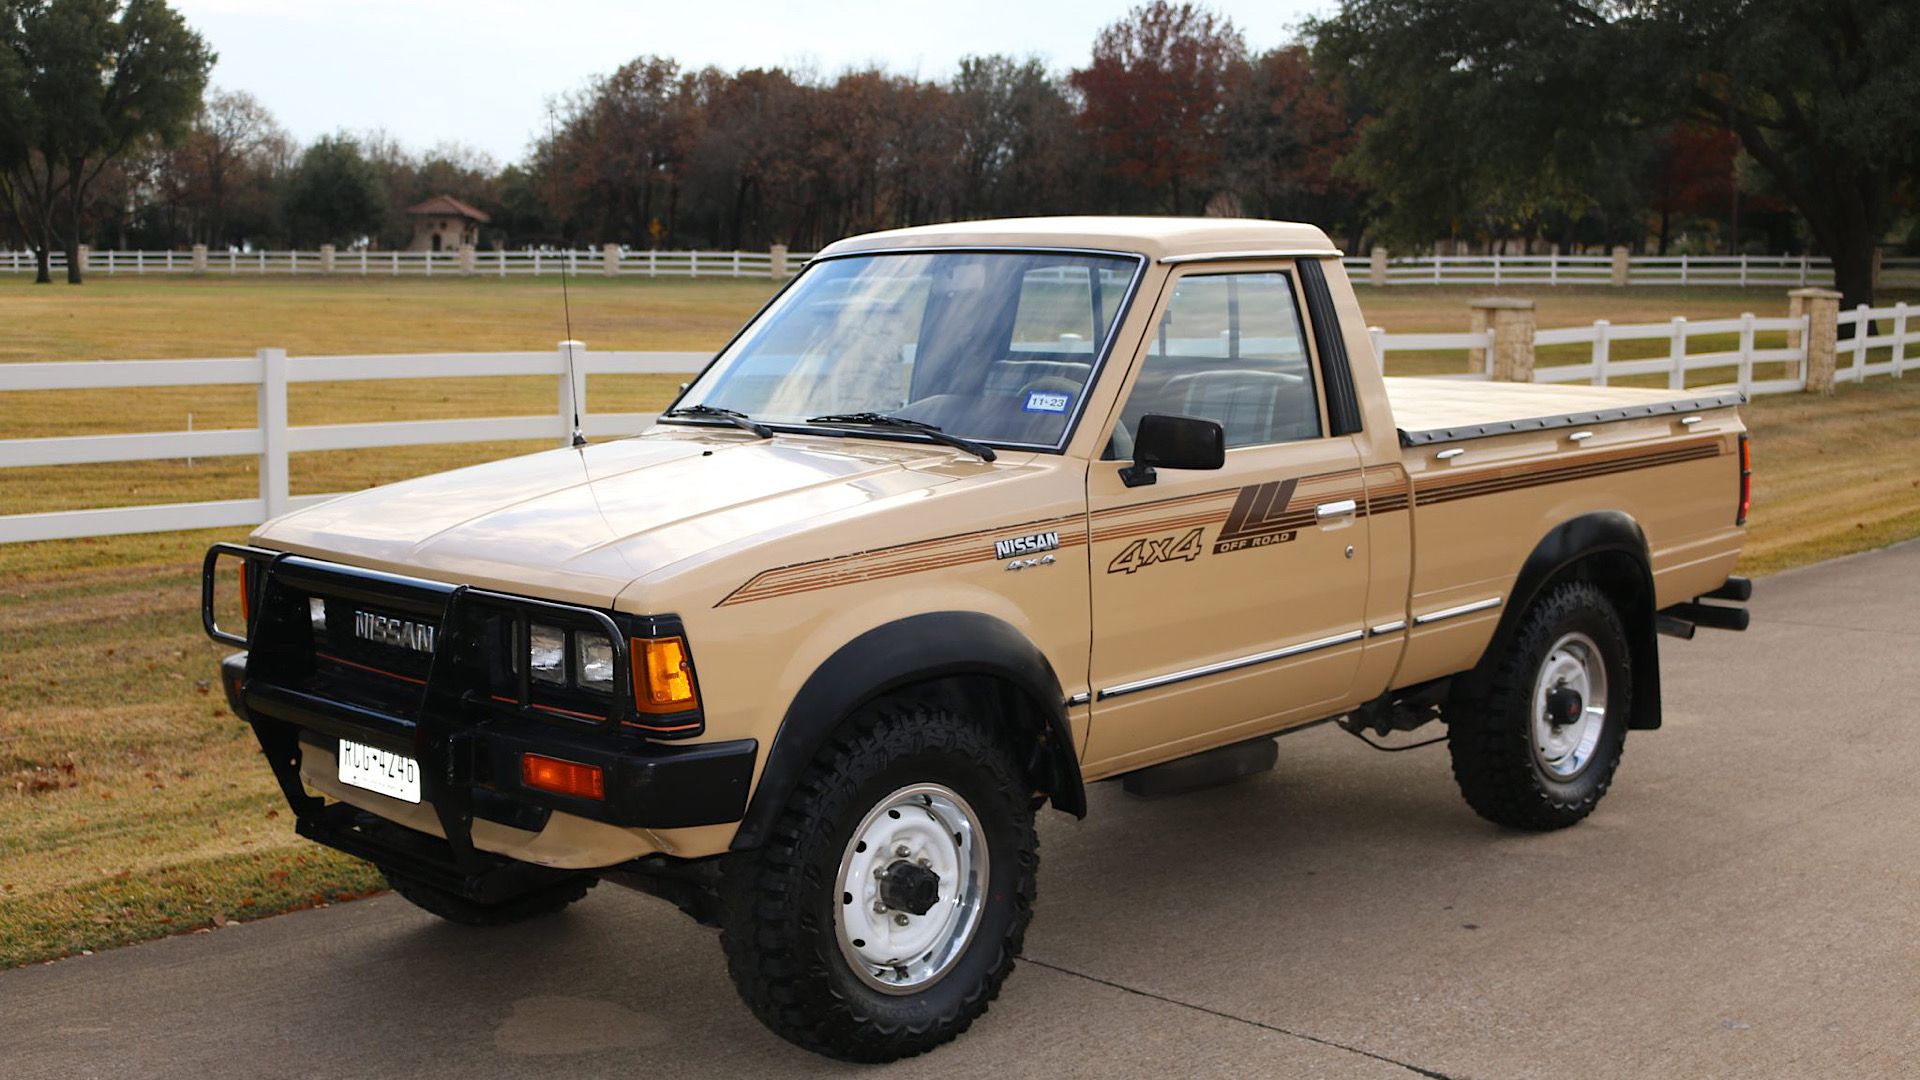 1984 Nissan Hardbody 720 4x4 in sand Posing on country road